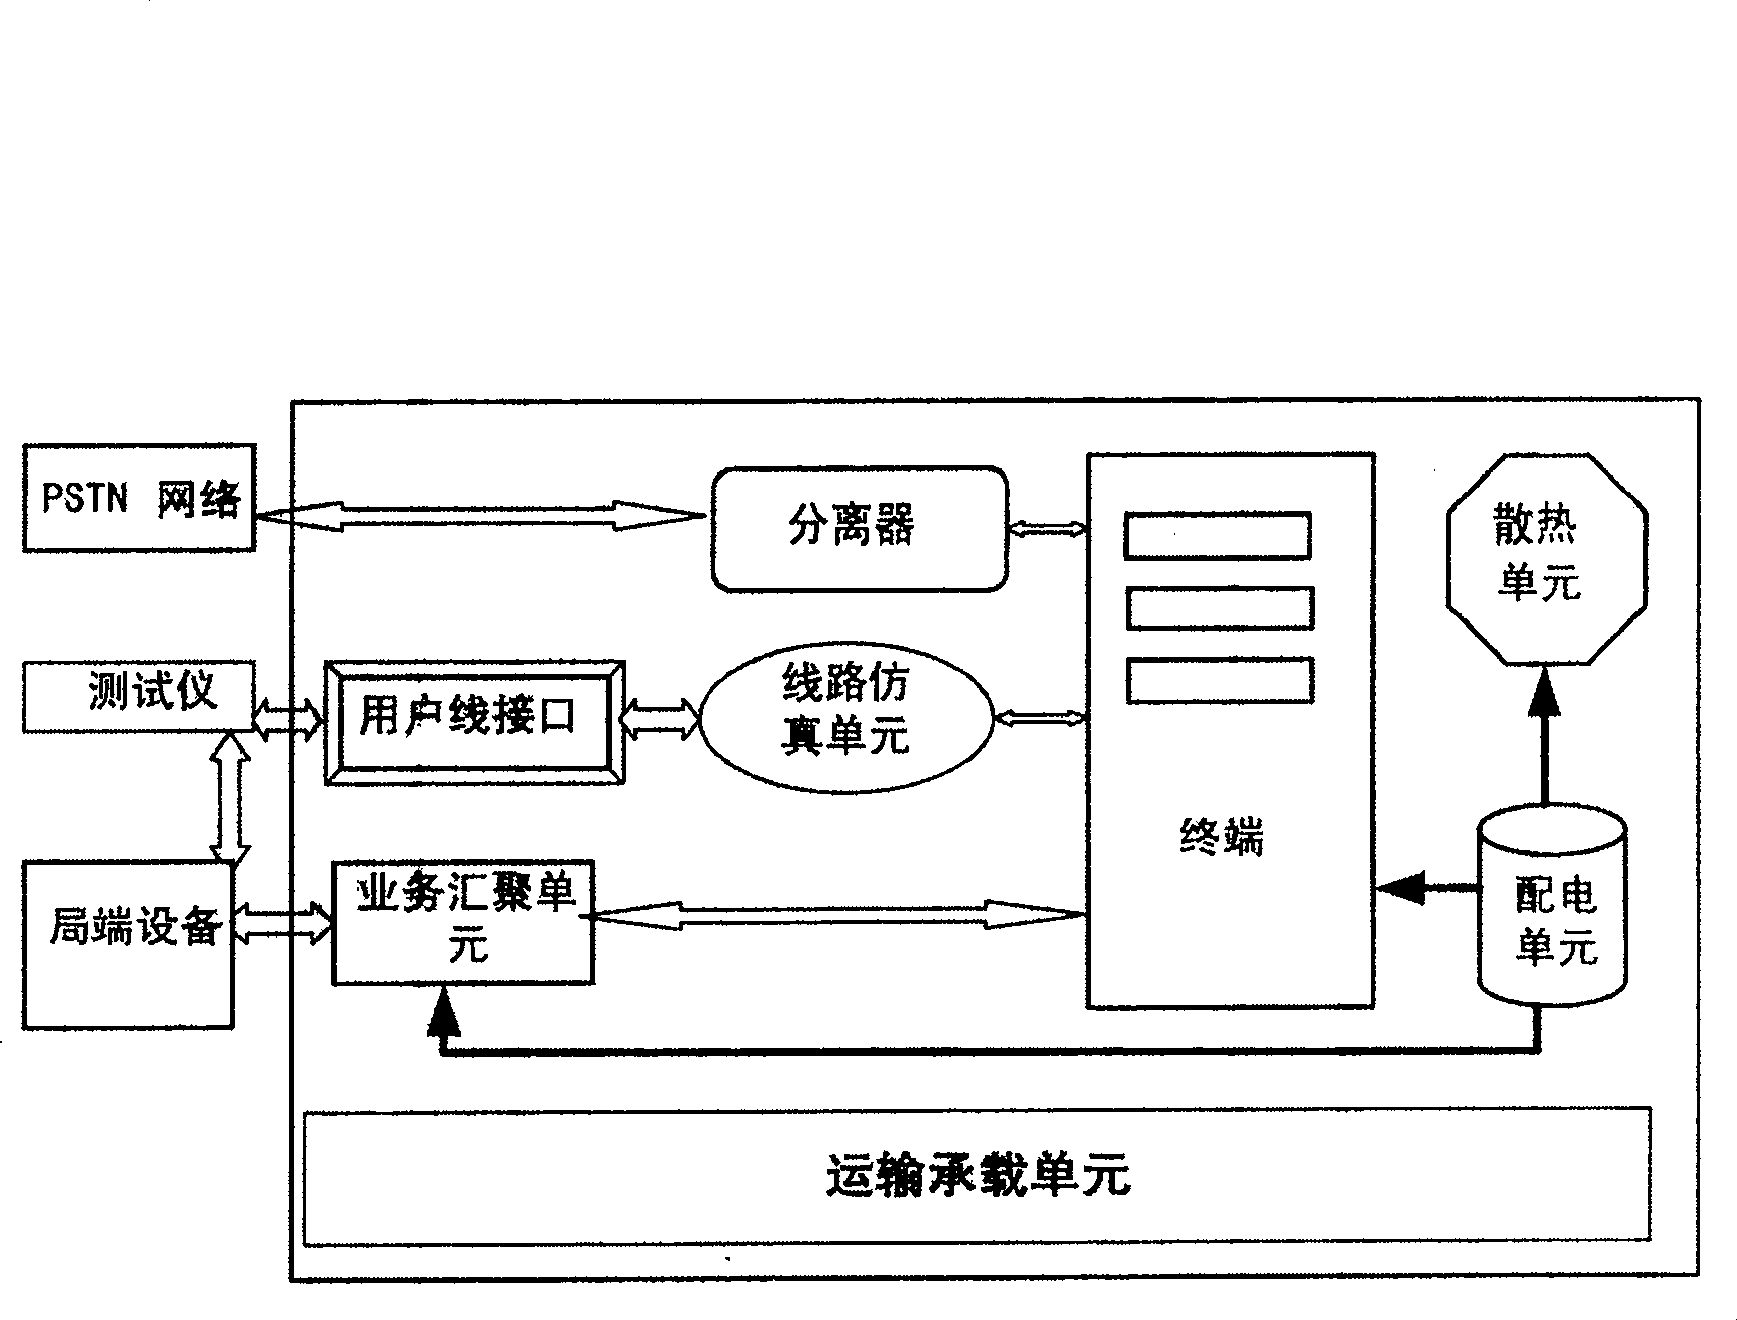 Comprehensive detector for communication access device